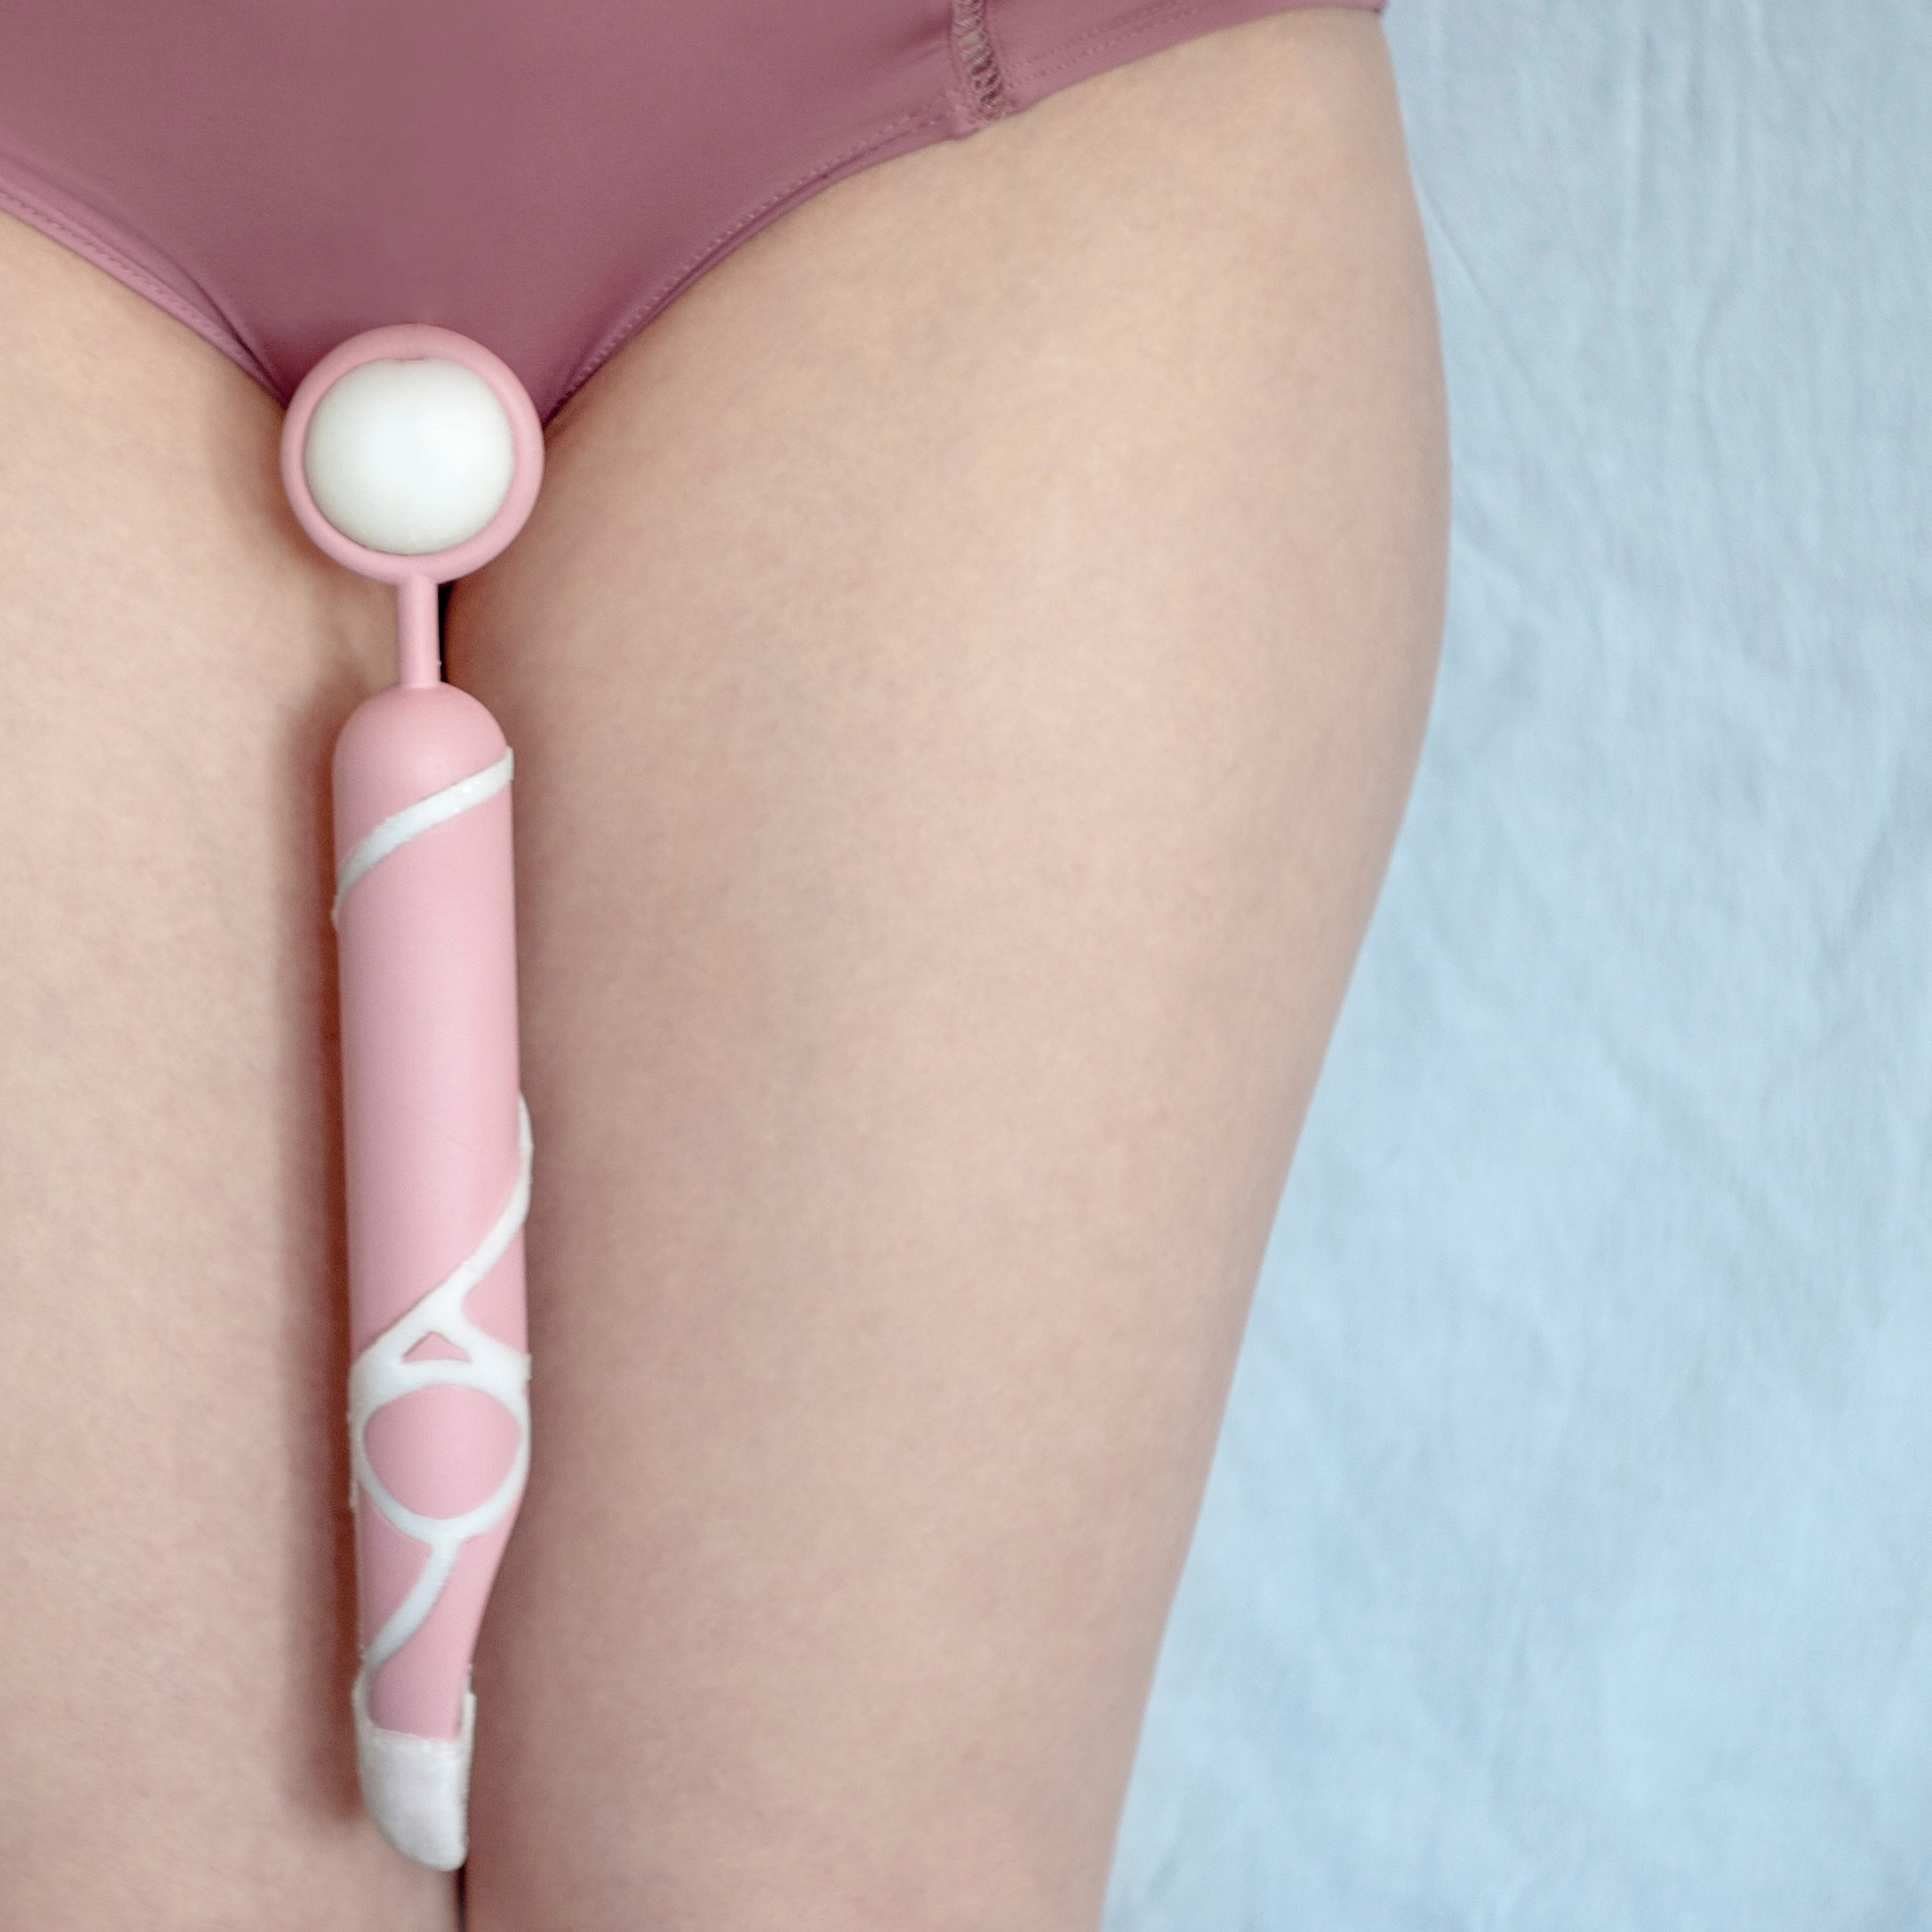 Kamila Rudnicka designs home insemination kit for use as part of image